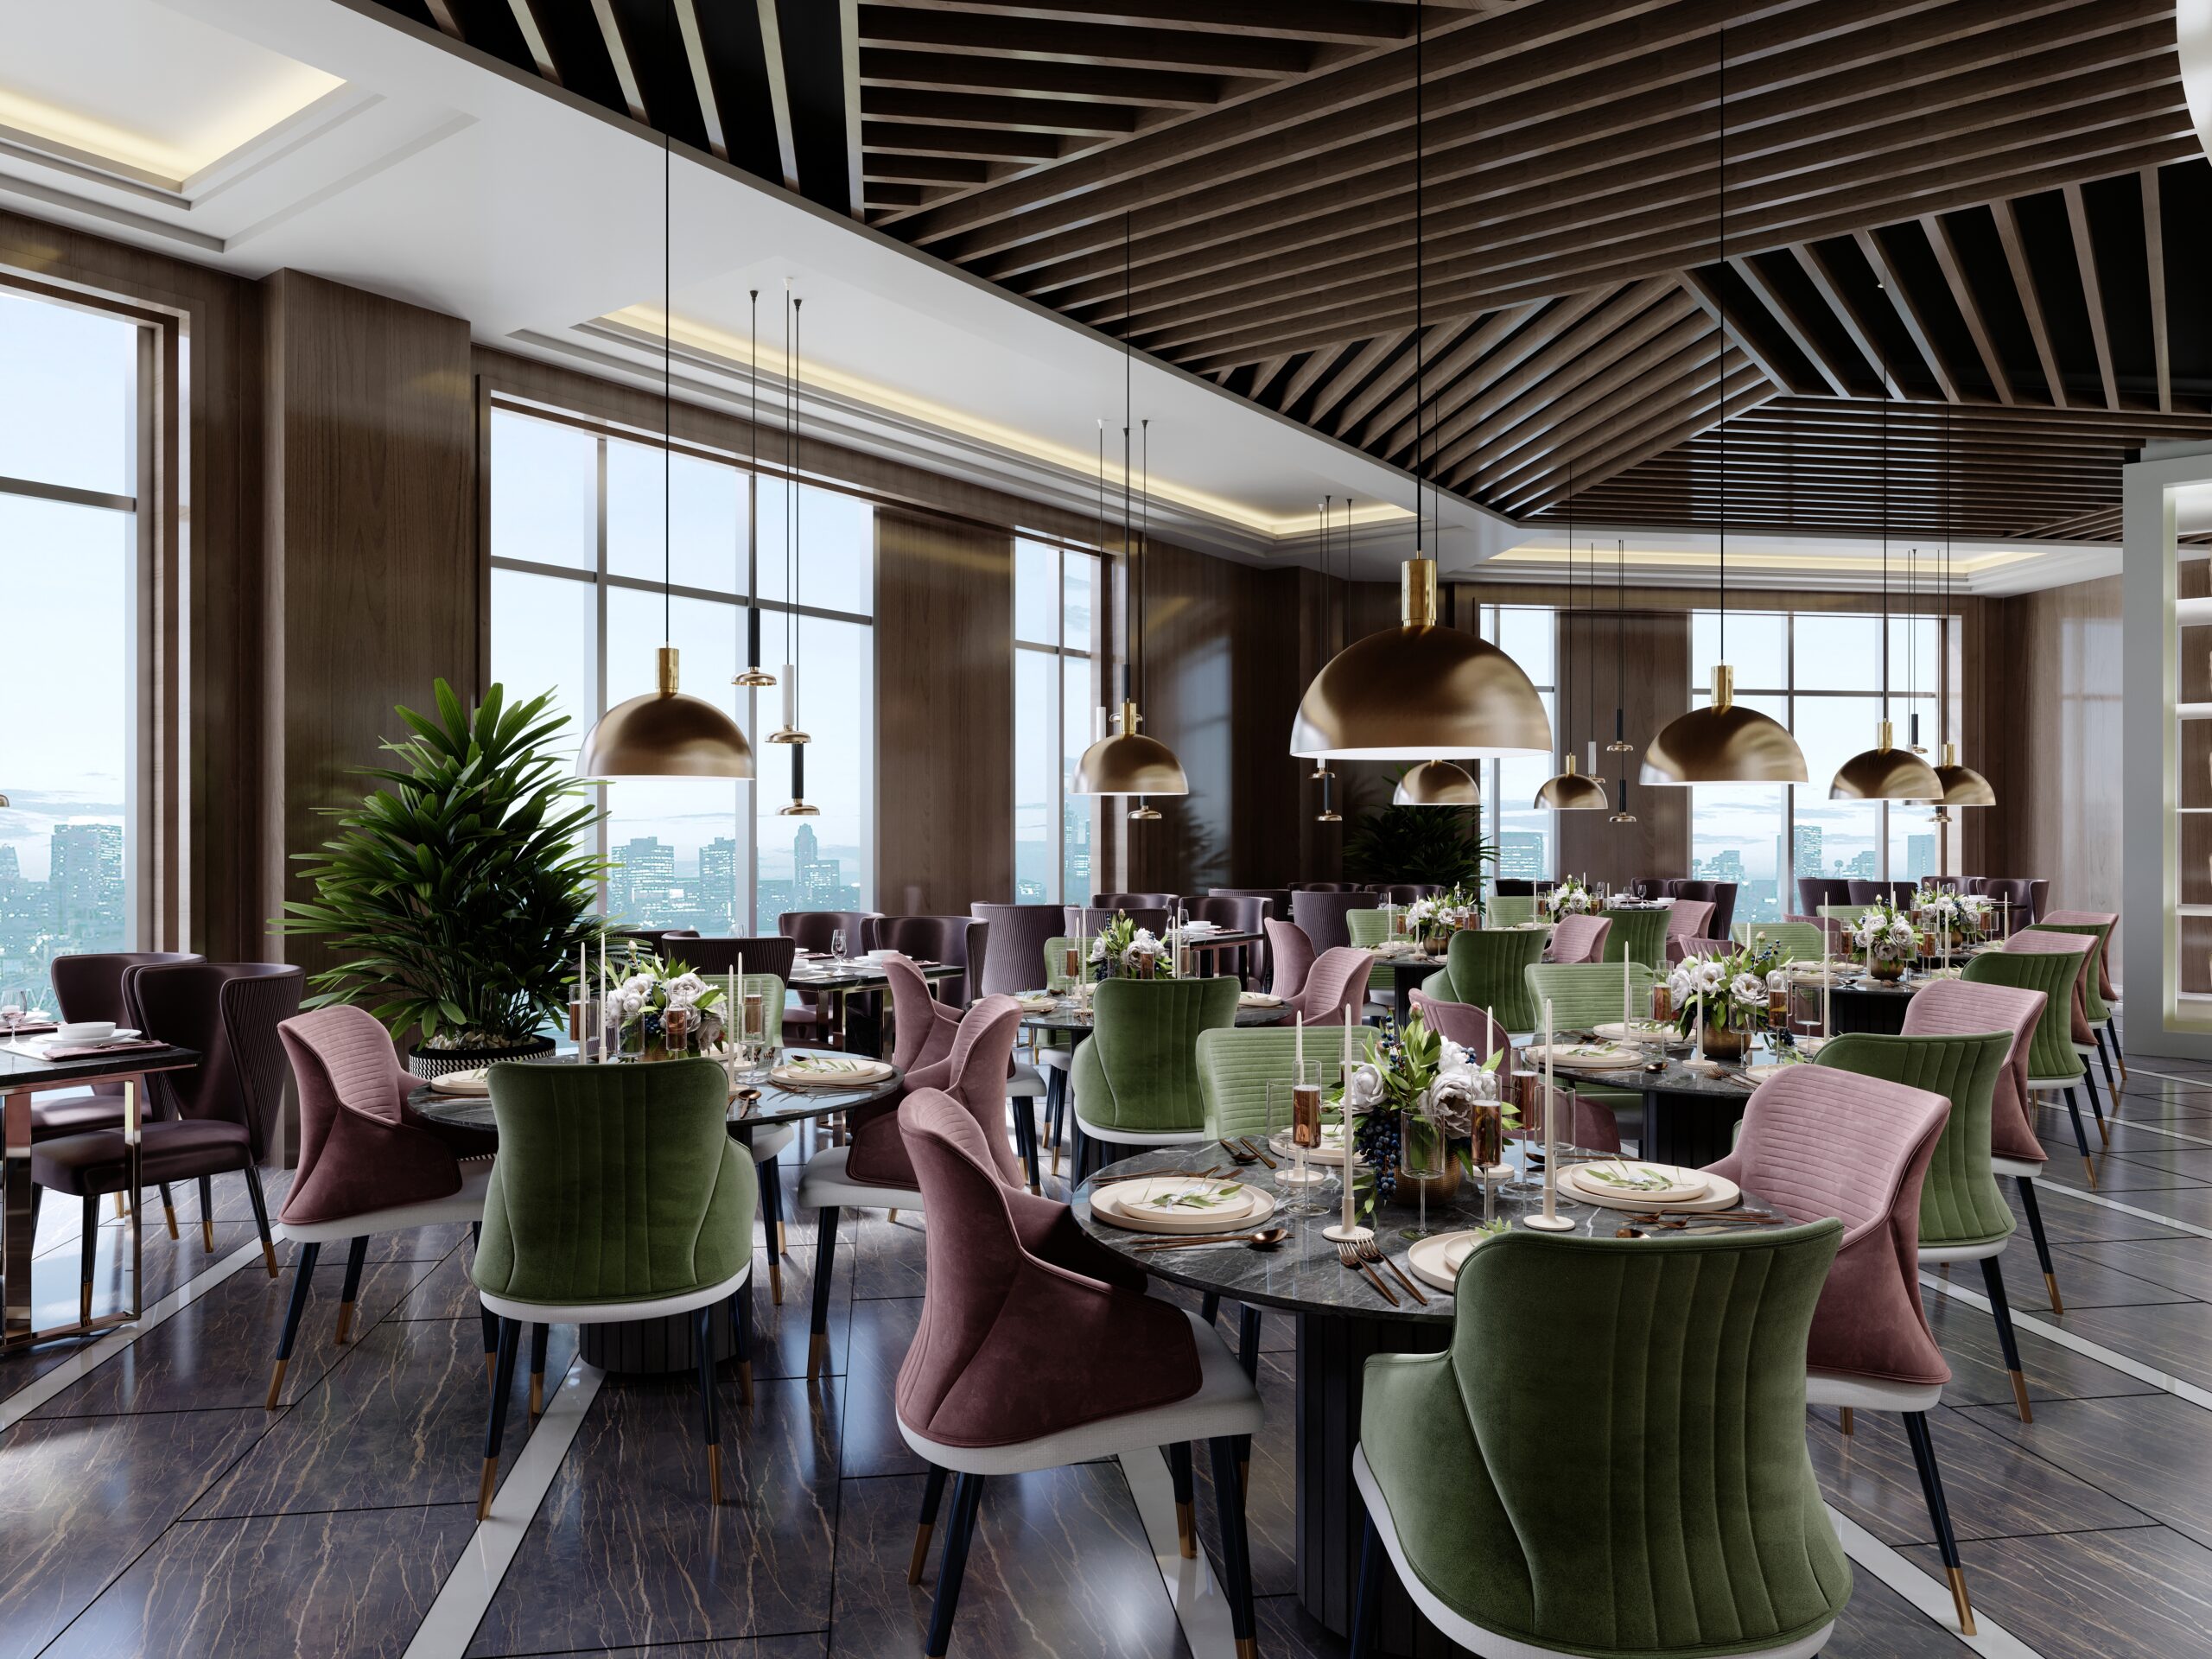 The design of the restaurant is in a modern style with a wooden pergola on the ceiling with a buffet area and colored chairs and a black marble floor. 3D rendering.